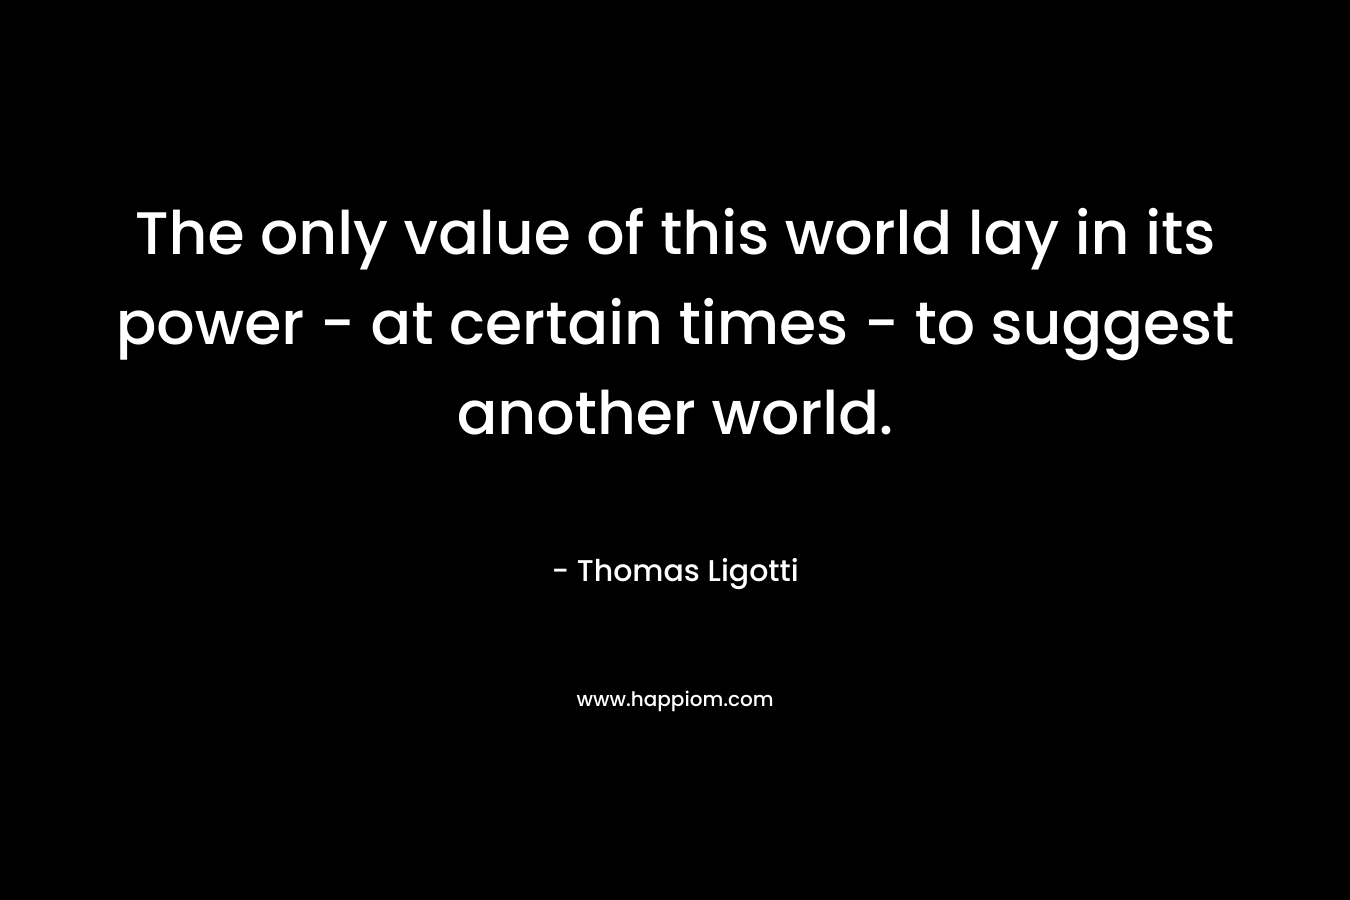 The only value of this world lay in its power – at certain times – to suggest another world. – Thomas Ligotti